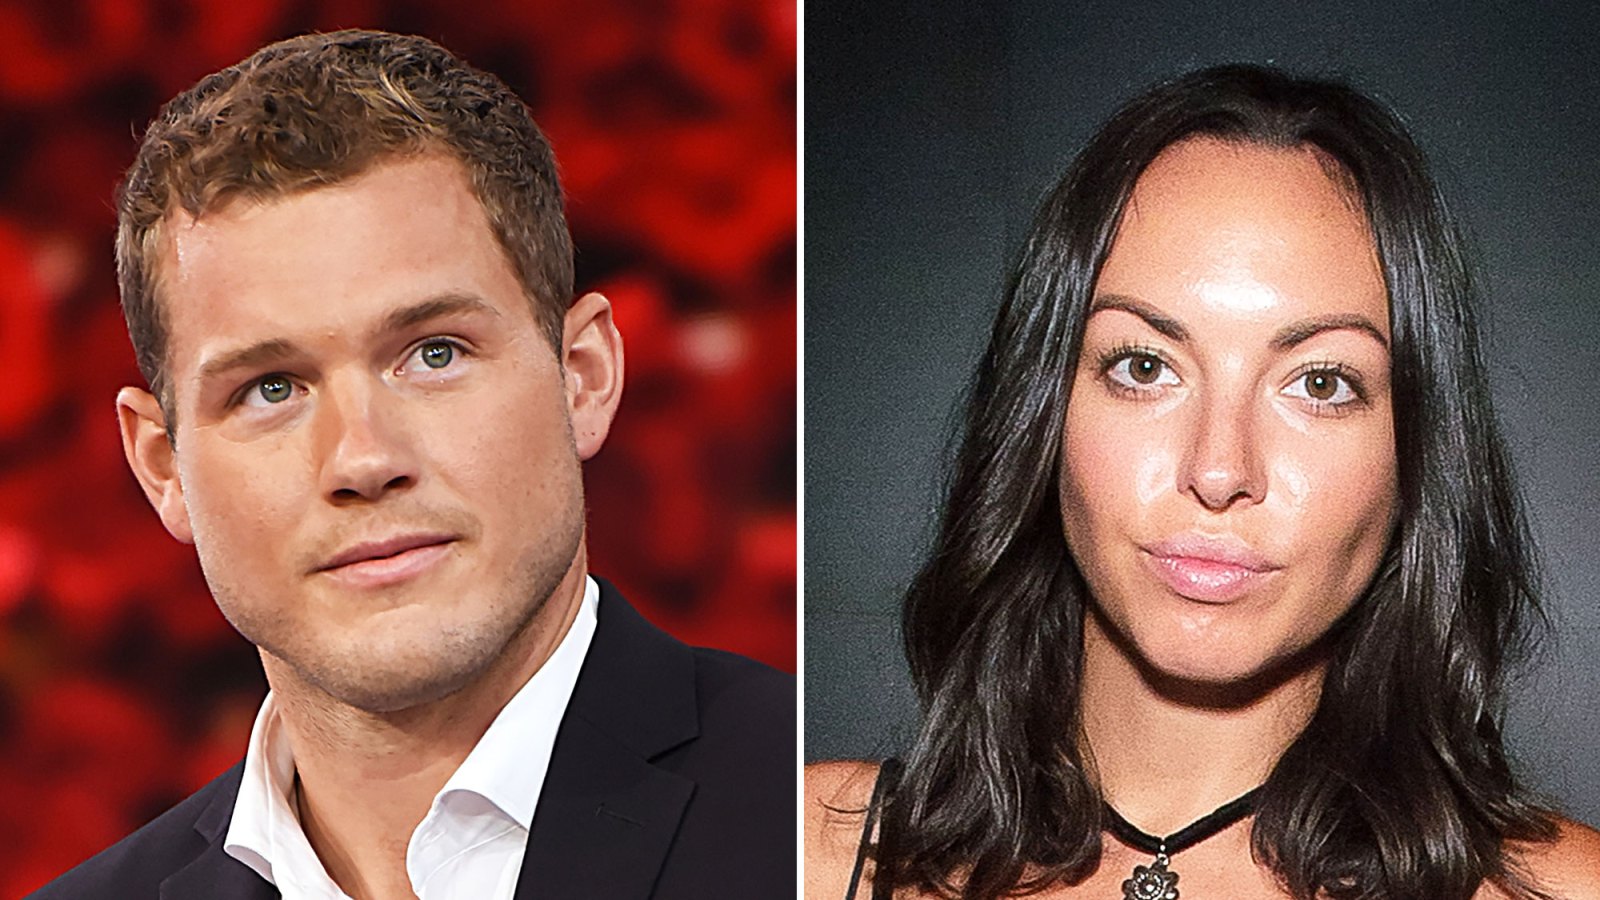 Colton Underwood Sounds Off on Tracy Shapoff's Offensive Tweets: 'I Think That's a Growing Thing'